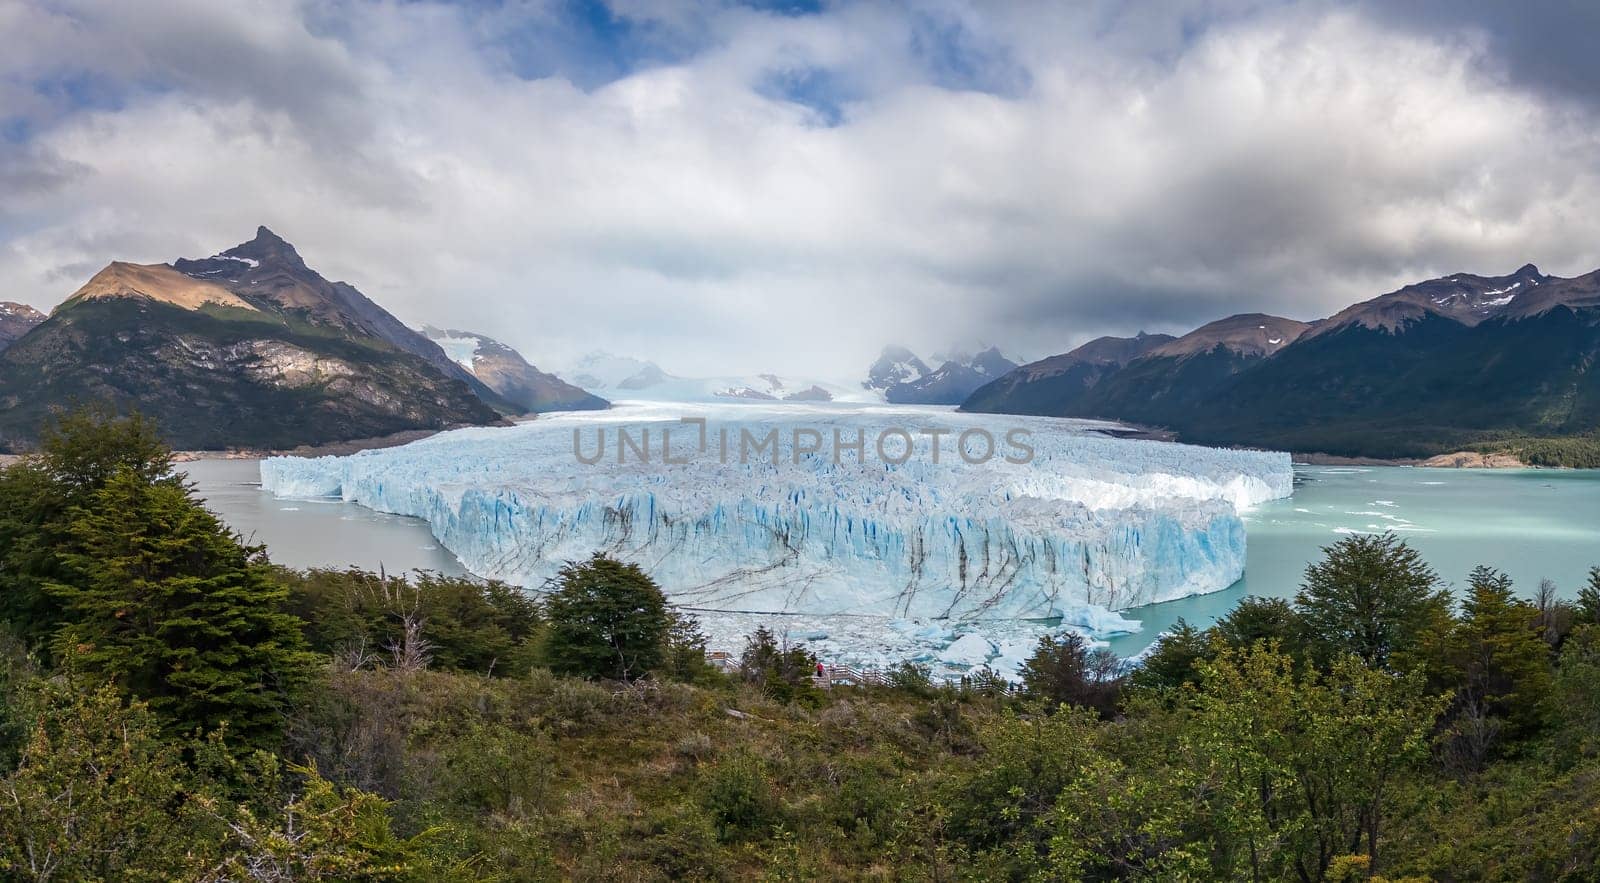 Stunning glacier view with mountains under cloudy sky. Perito Moreno